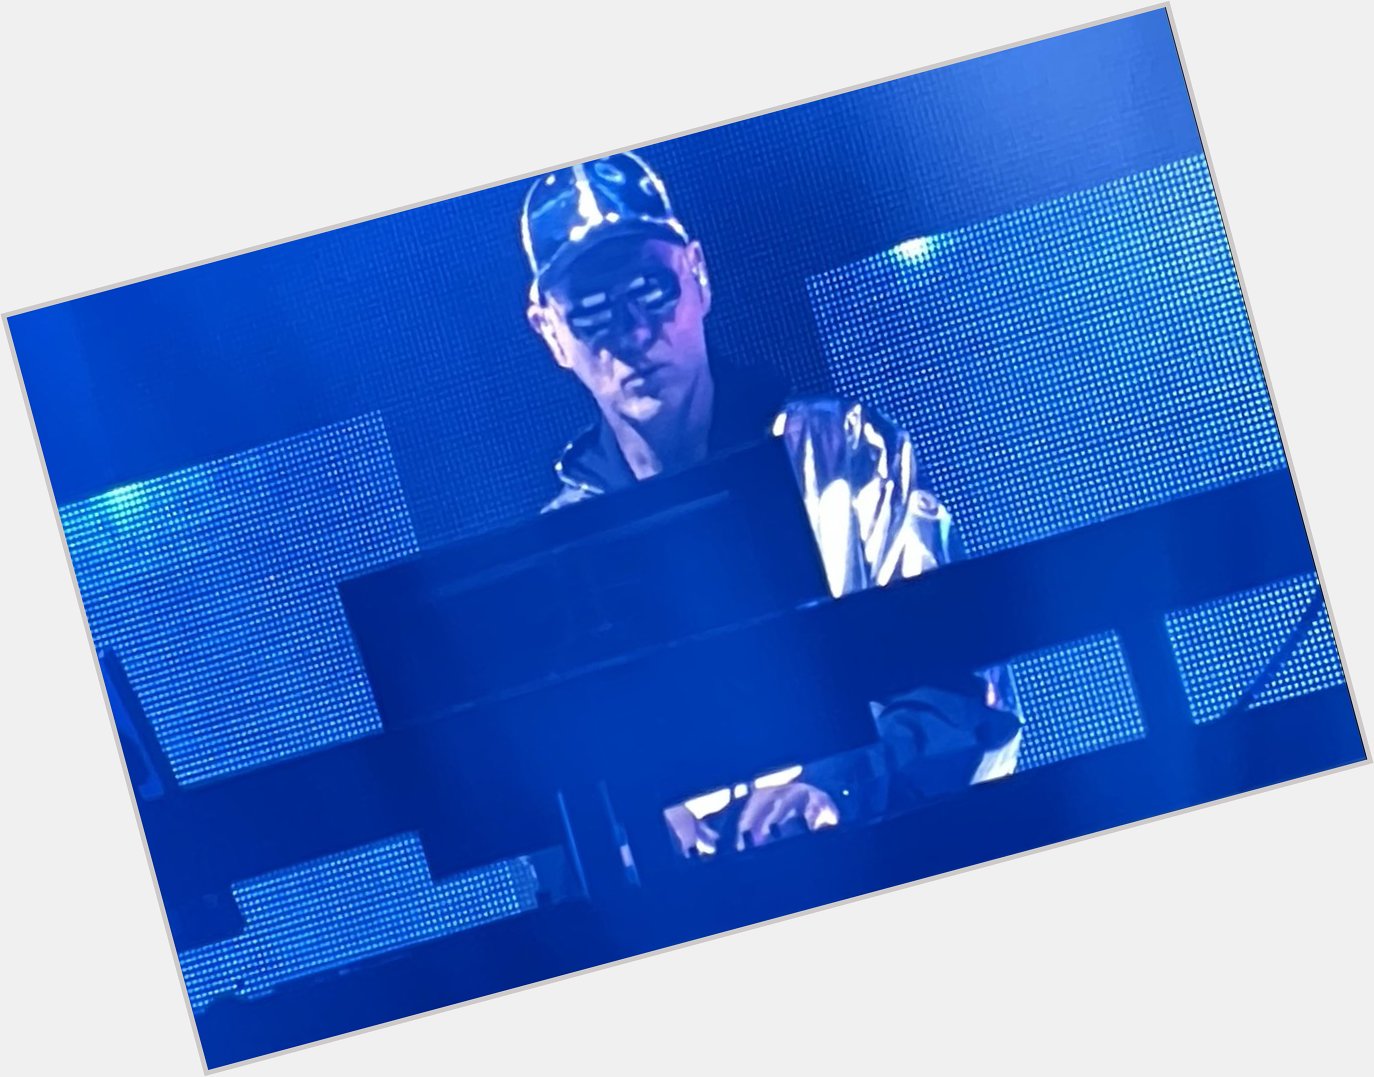 I took this picture last Wednesday. Happy birthday Chris Lowe, even if you always make a bad face  